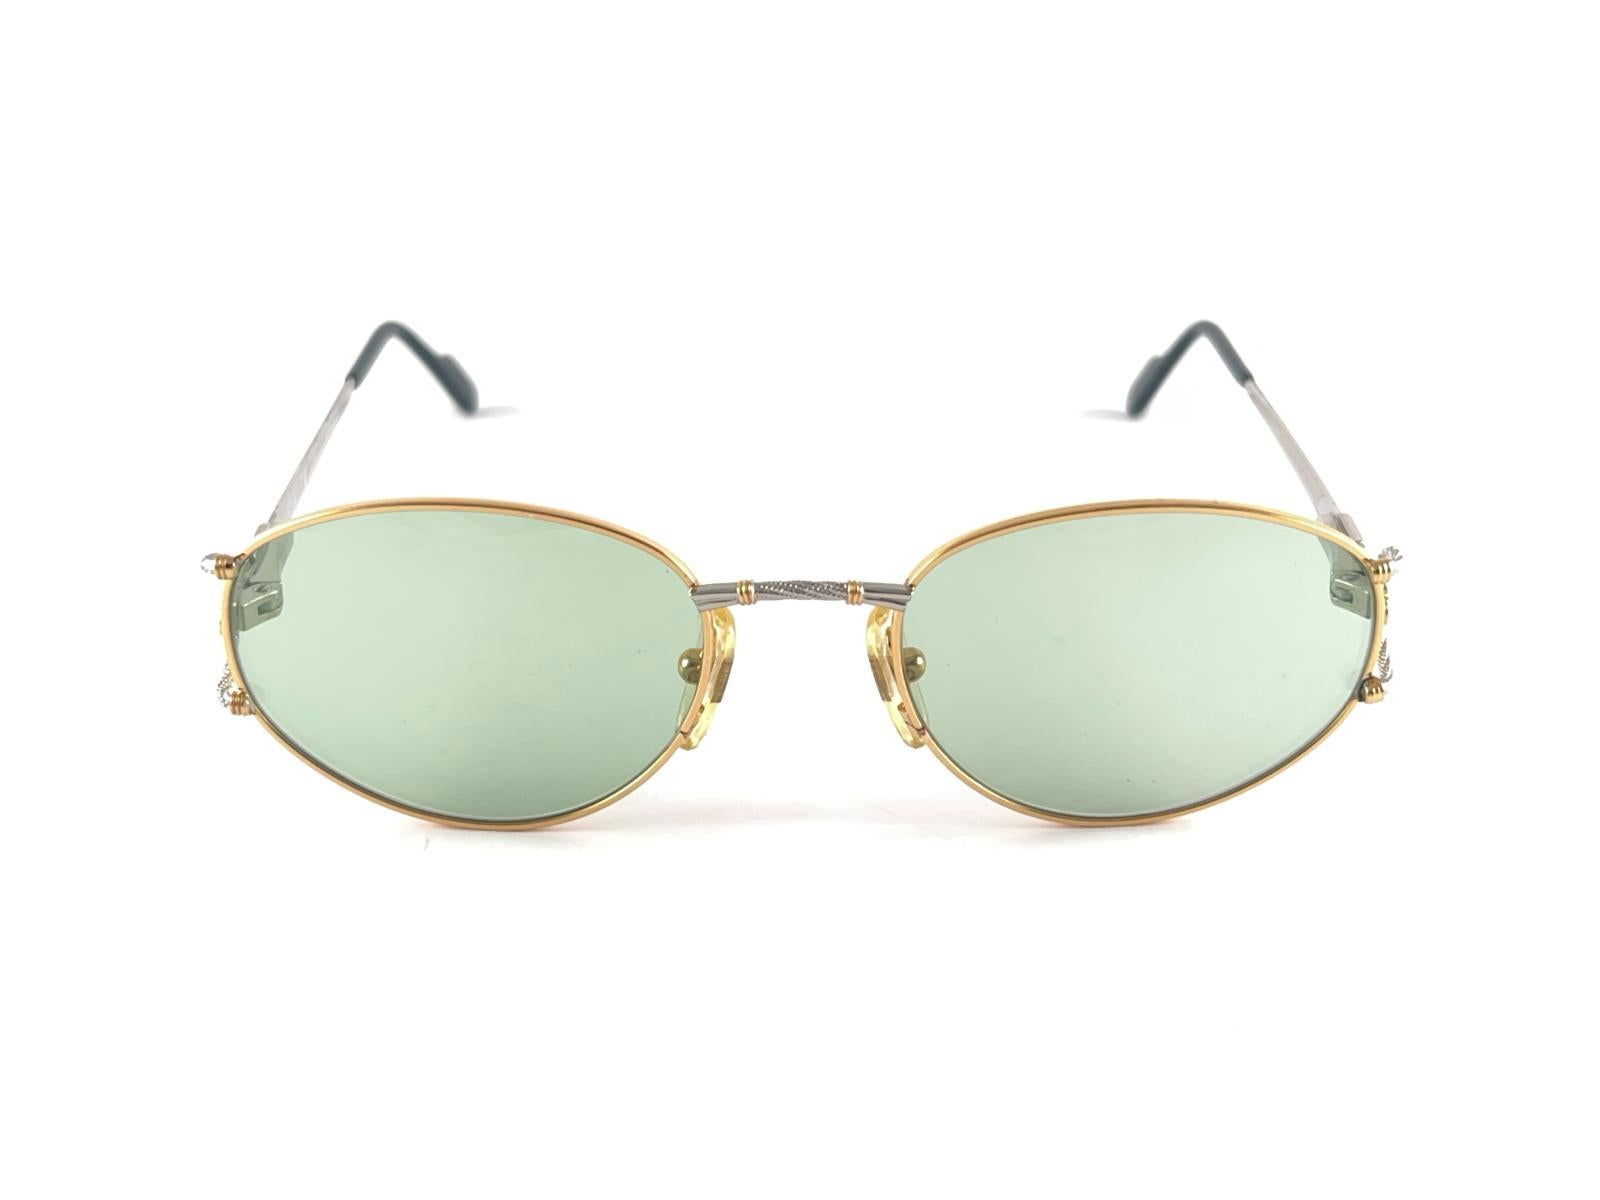 New Vintage Tiffany T 387 Oval Gold Plated Green Lenses 90'S Sunglasses Italy In New Condition For Sale In Baleares, Baleares